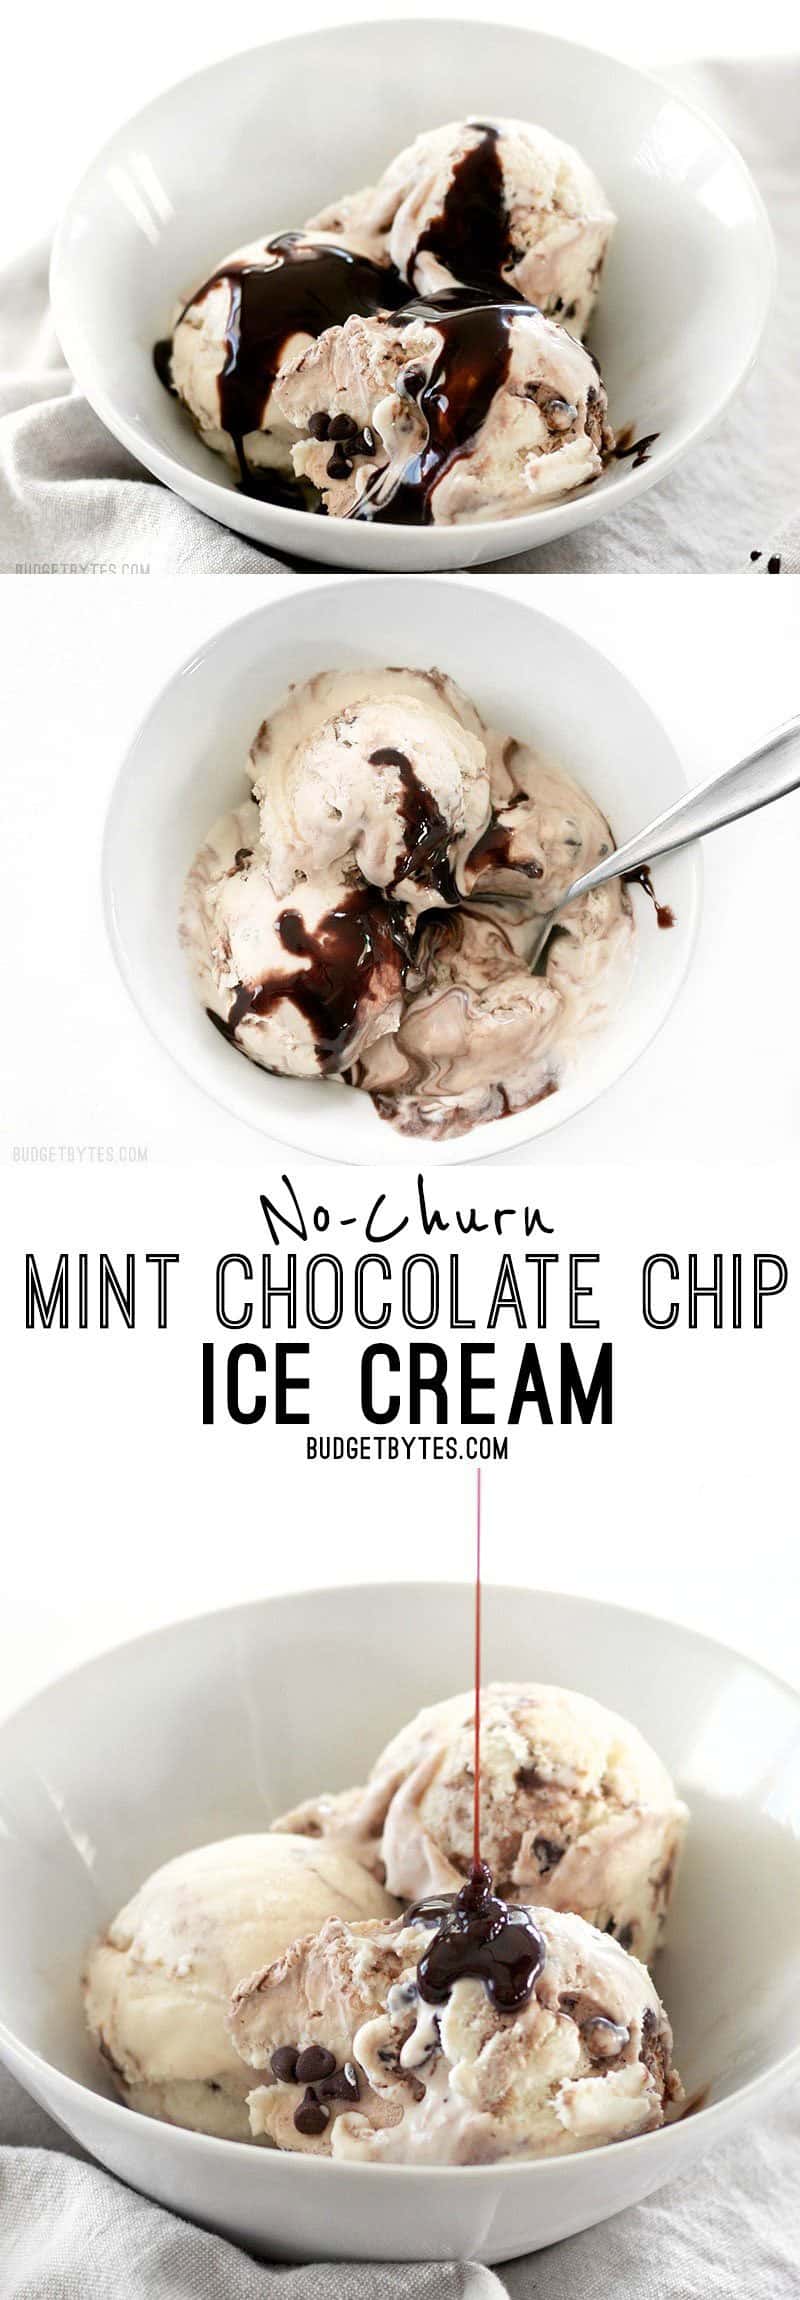 Silky smooth and creamy No-Churn Mint Chocolate Chip Ice Cream is easy to make at home. BudgetBytes.com